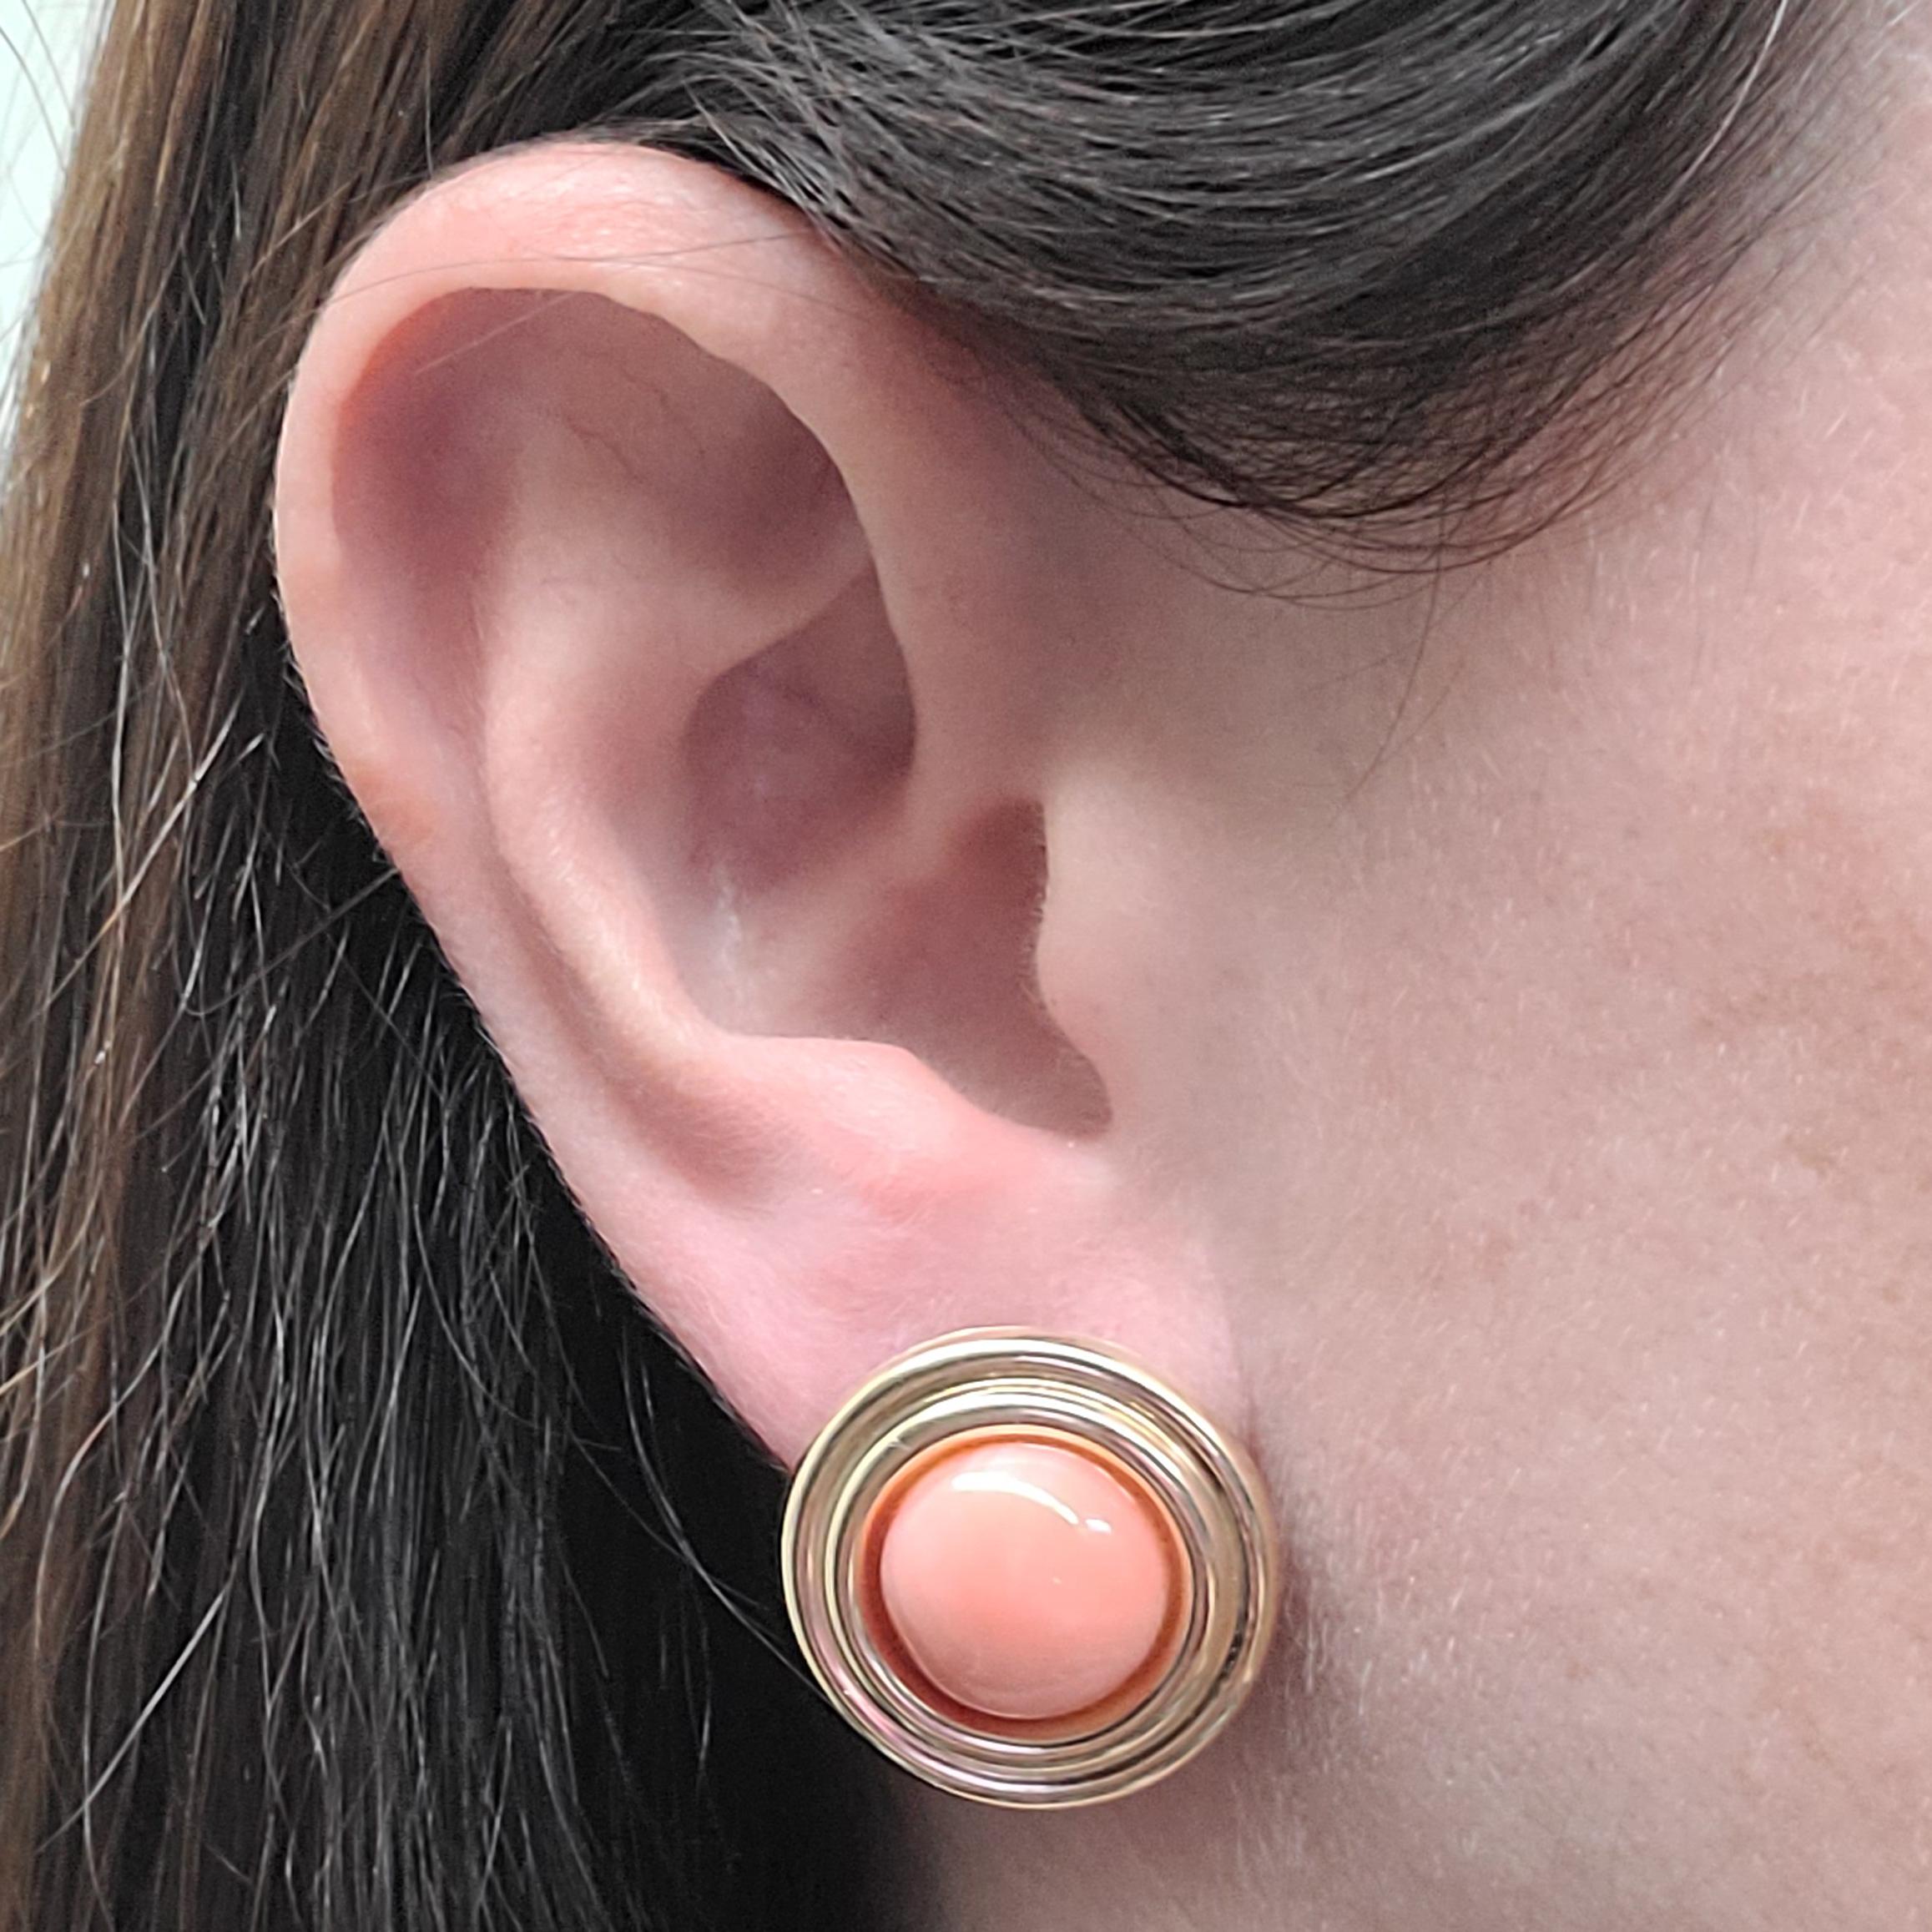 14 Karat Yellow Gold Earrings Featuring 12mm Round Cabochon Corals. Pierced Post With Omega Clip Back For A Supportive Hold. Finished Weight Is 4.6 Grams.